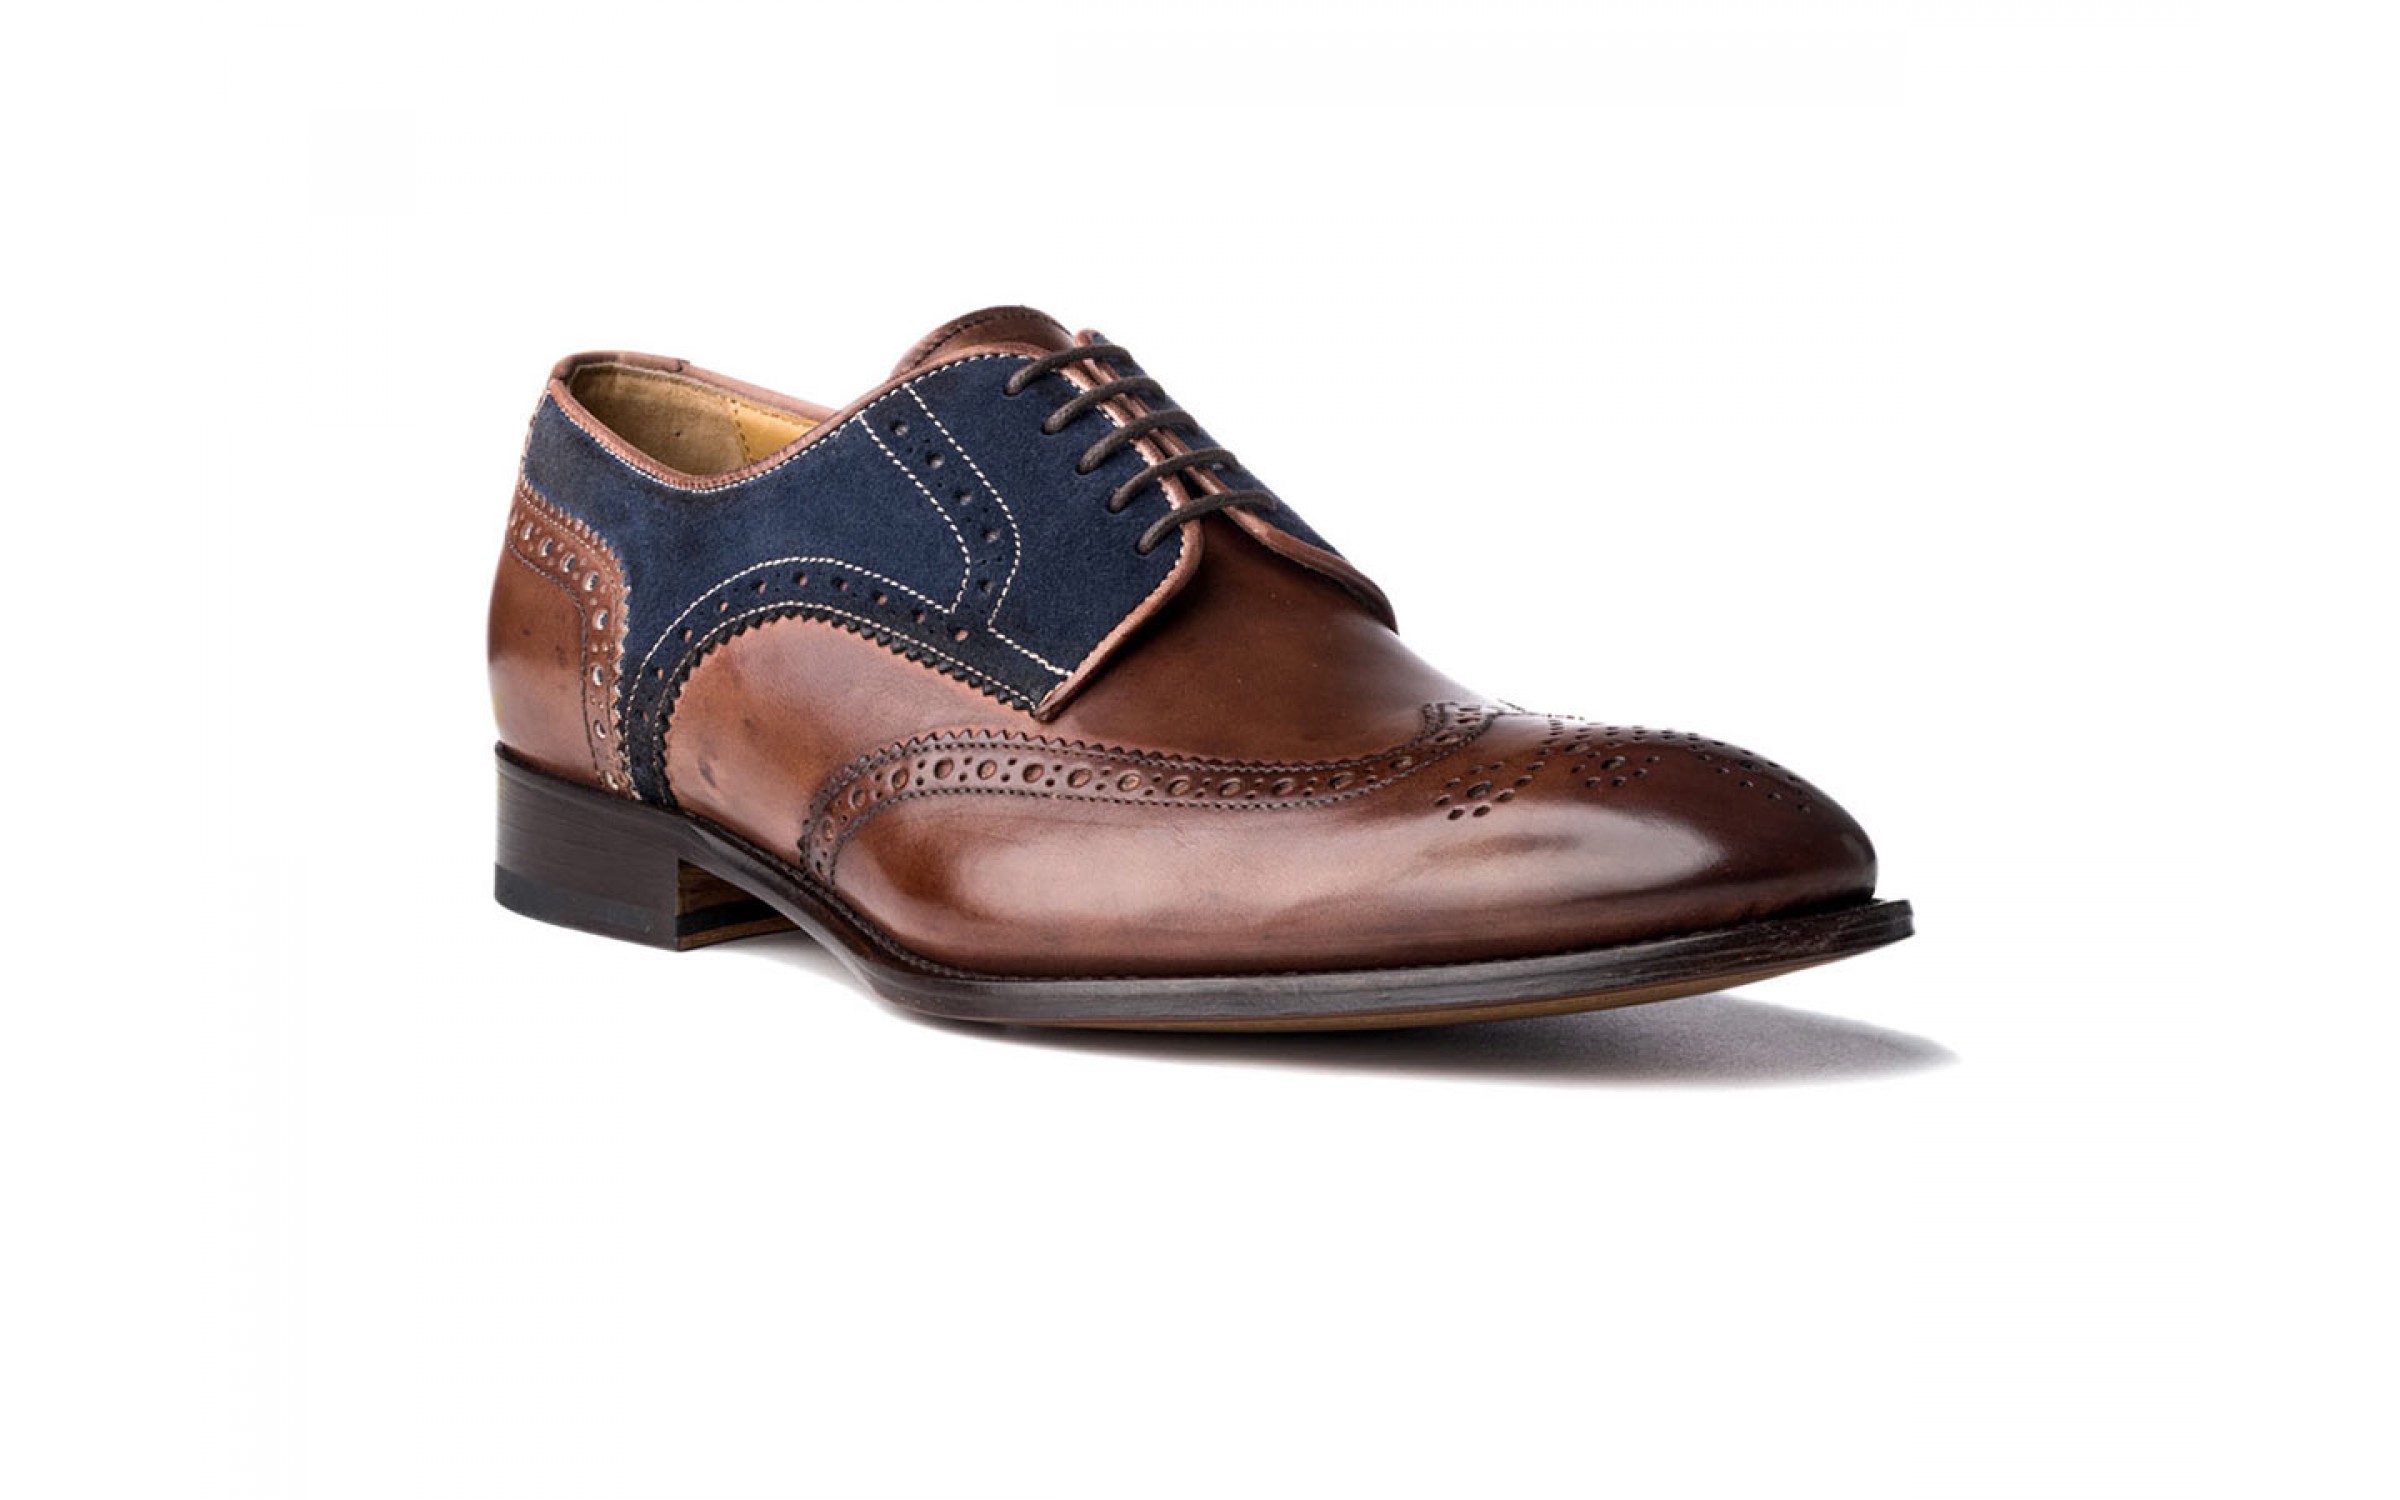 Wingtip Shoes in Brown Leather and Blue Suede